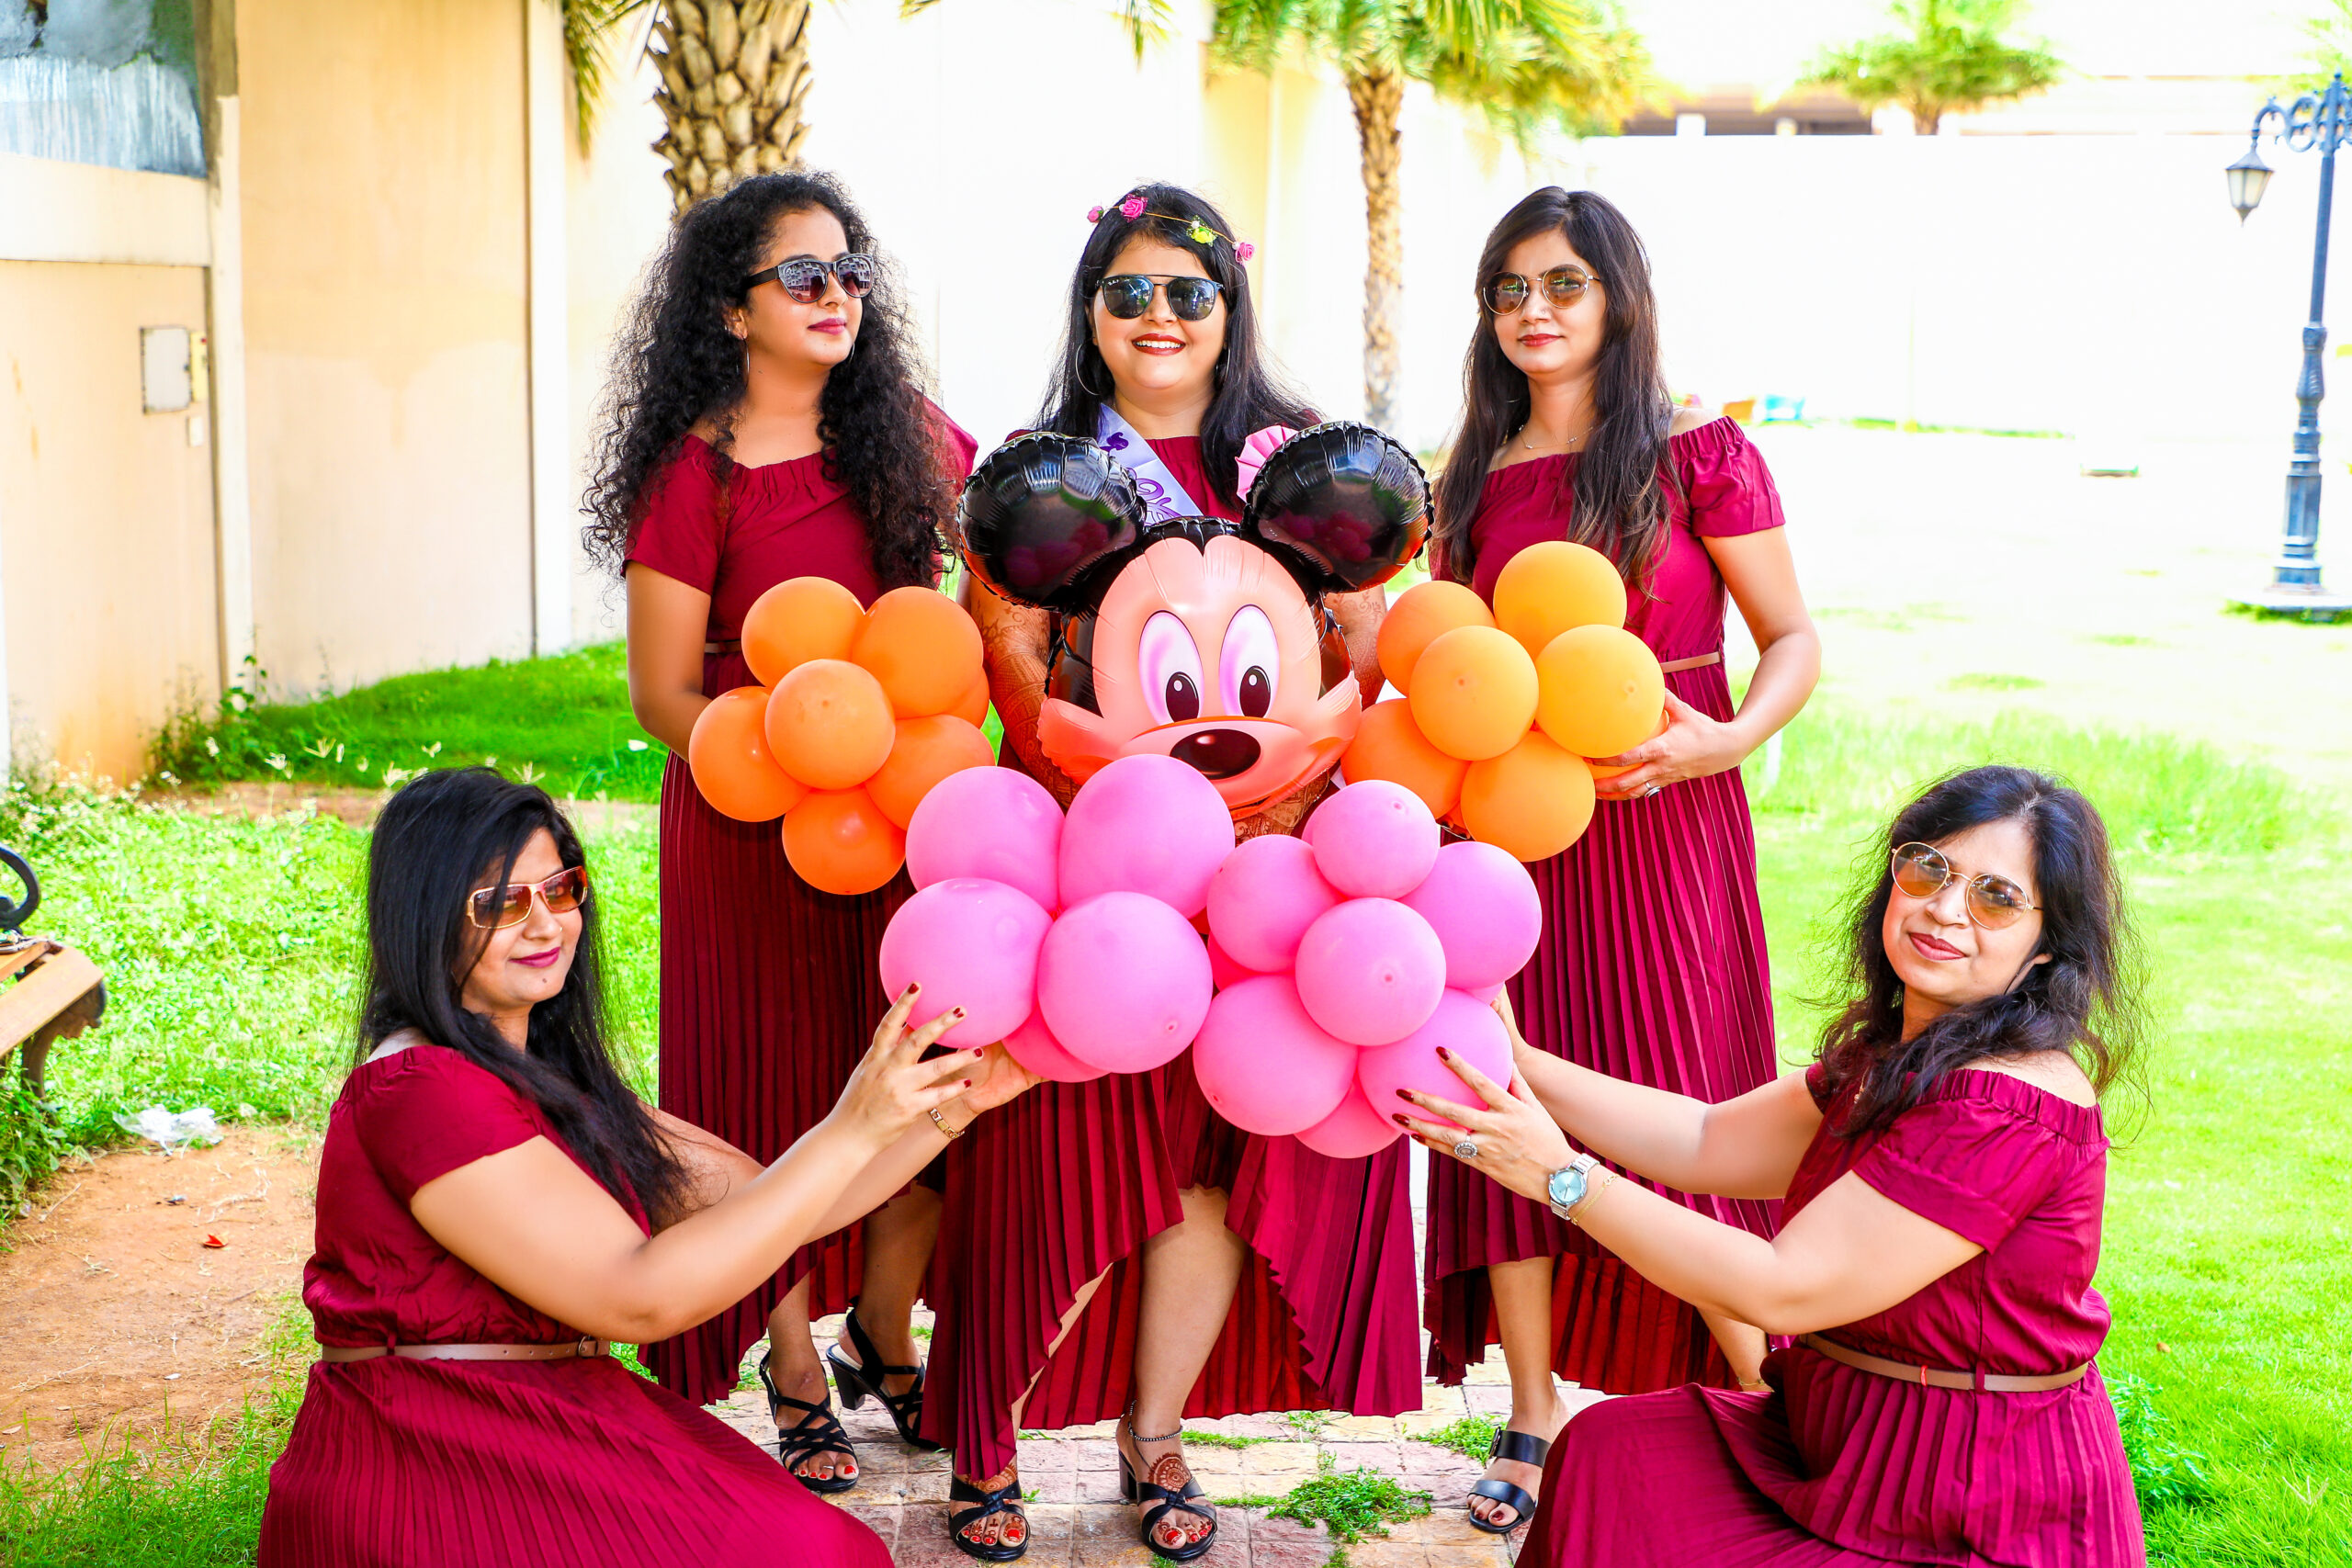 Women posing with balloons in a maternity shoot by AK Photography Coimbatore